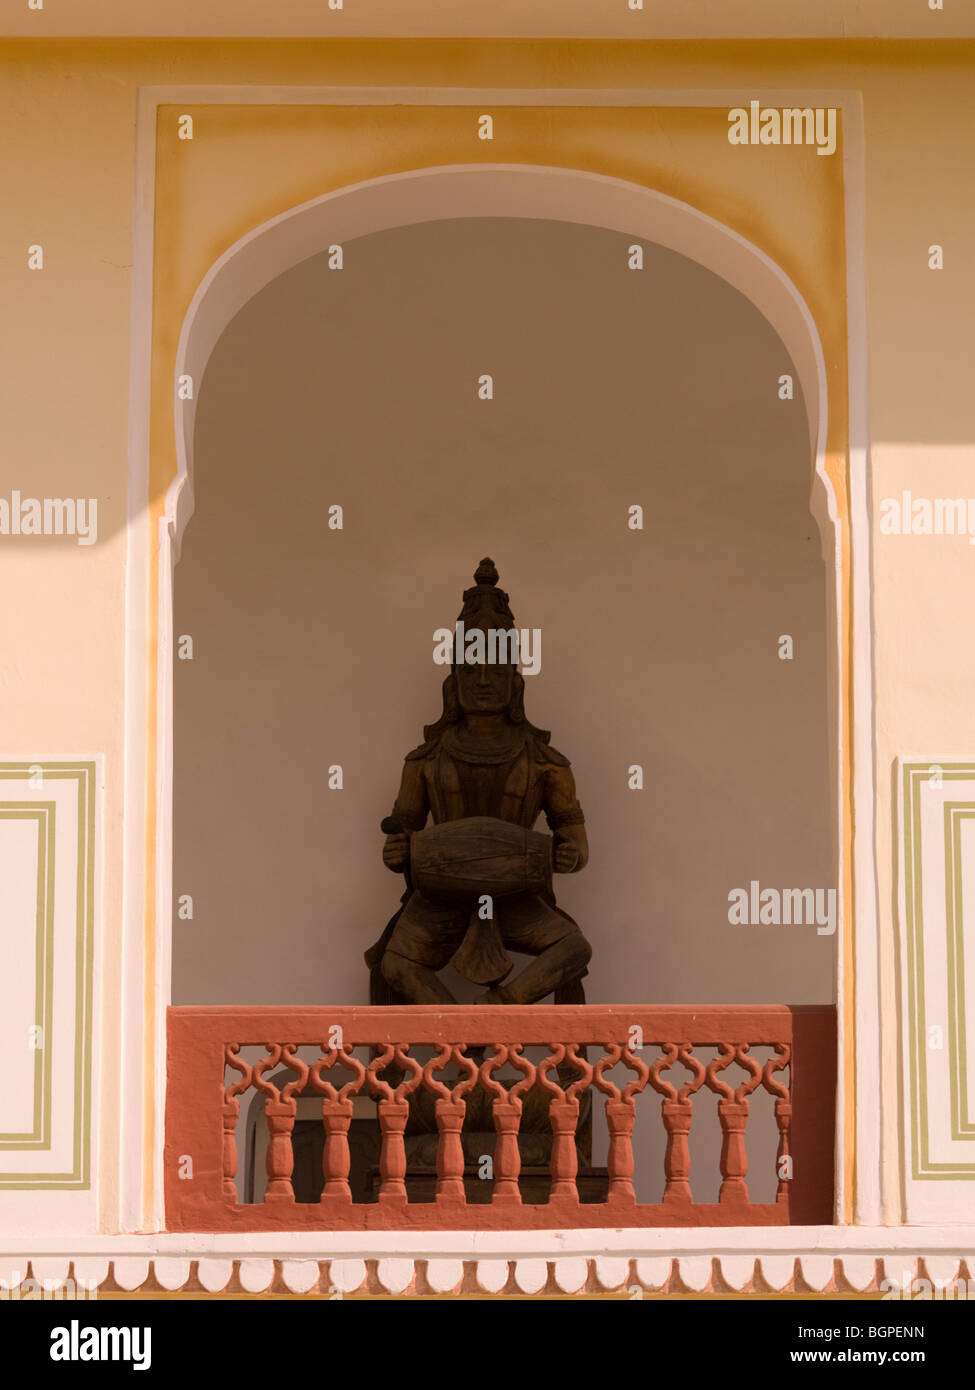 Statue in balcony, Jaipur, Rajasthan, India Stock Photo